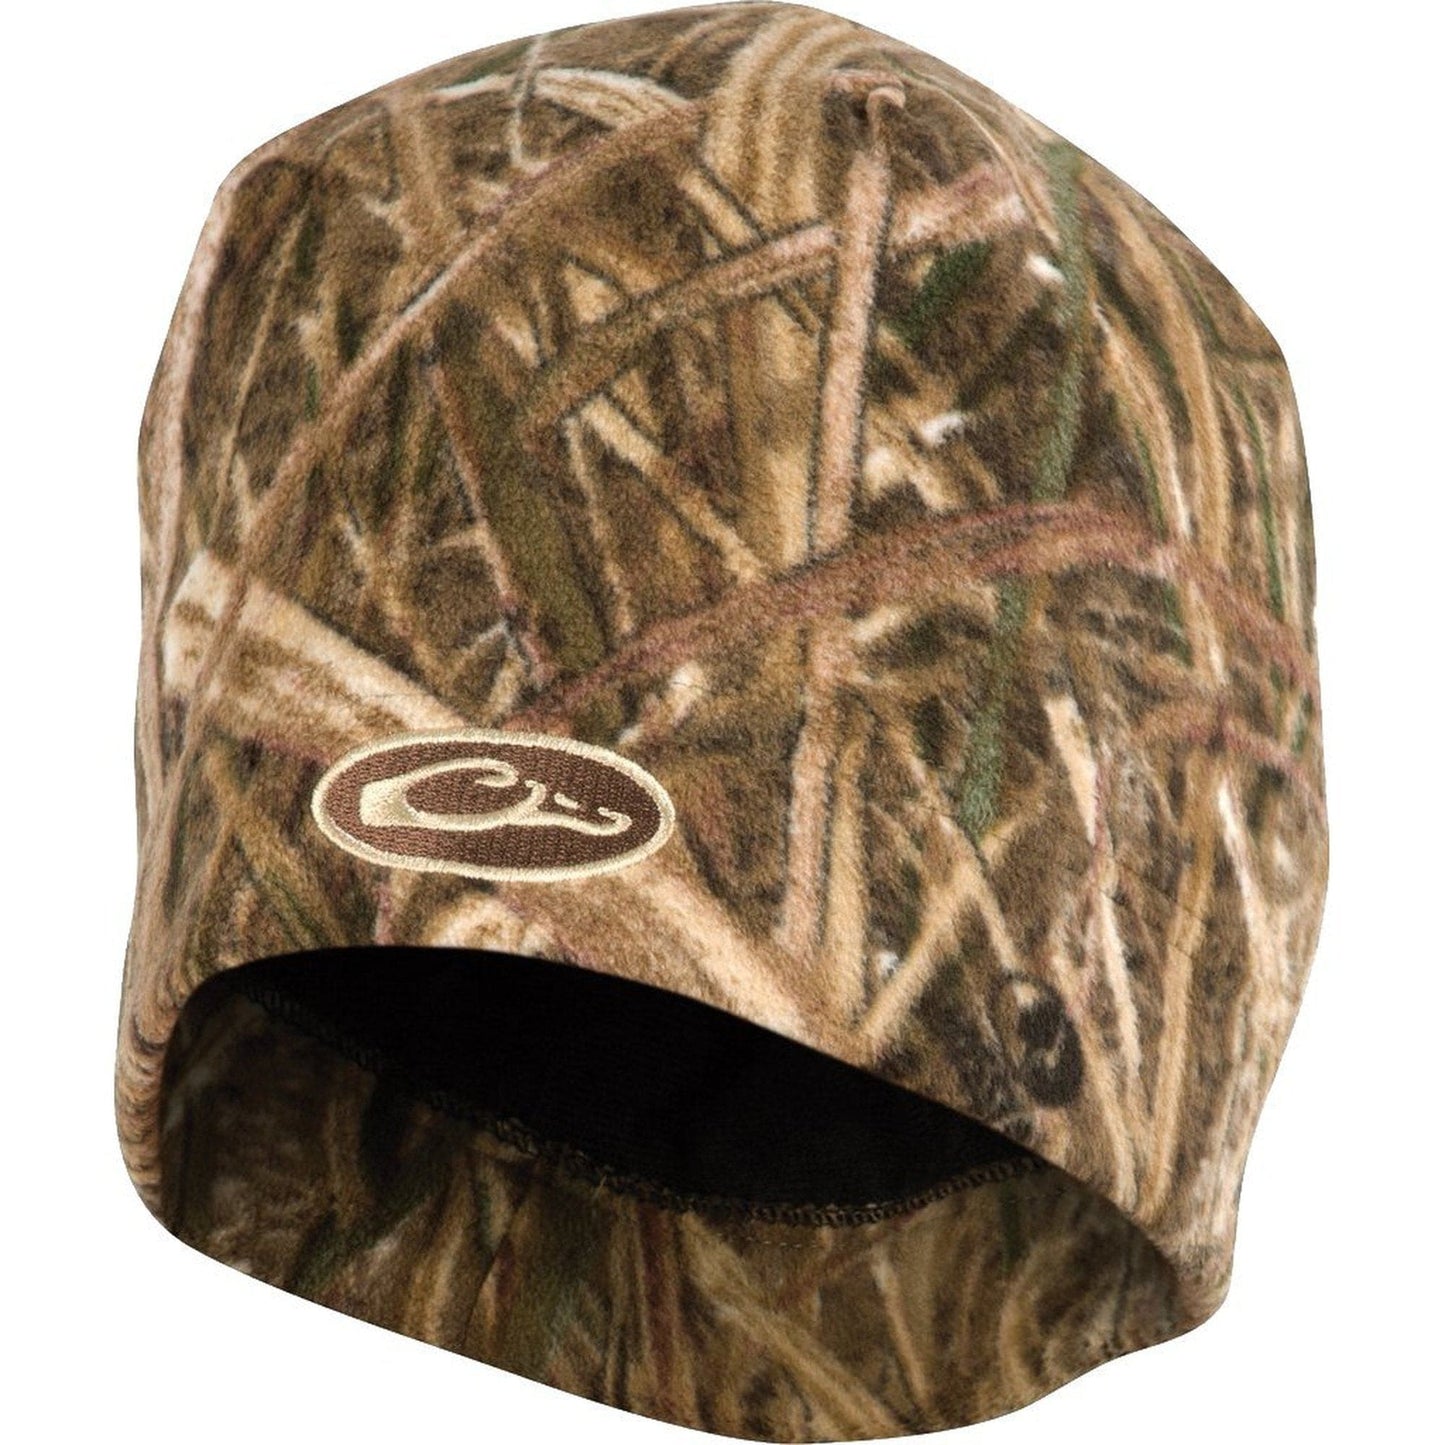 Drake Fleece Stocking Hat by Texas Fowlers